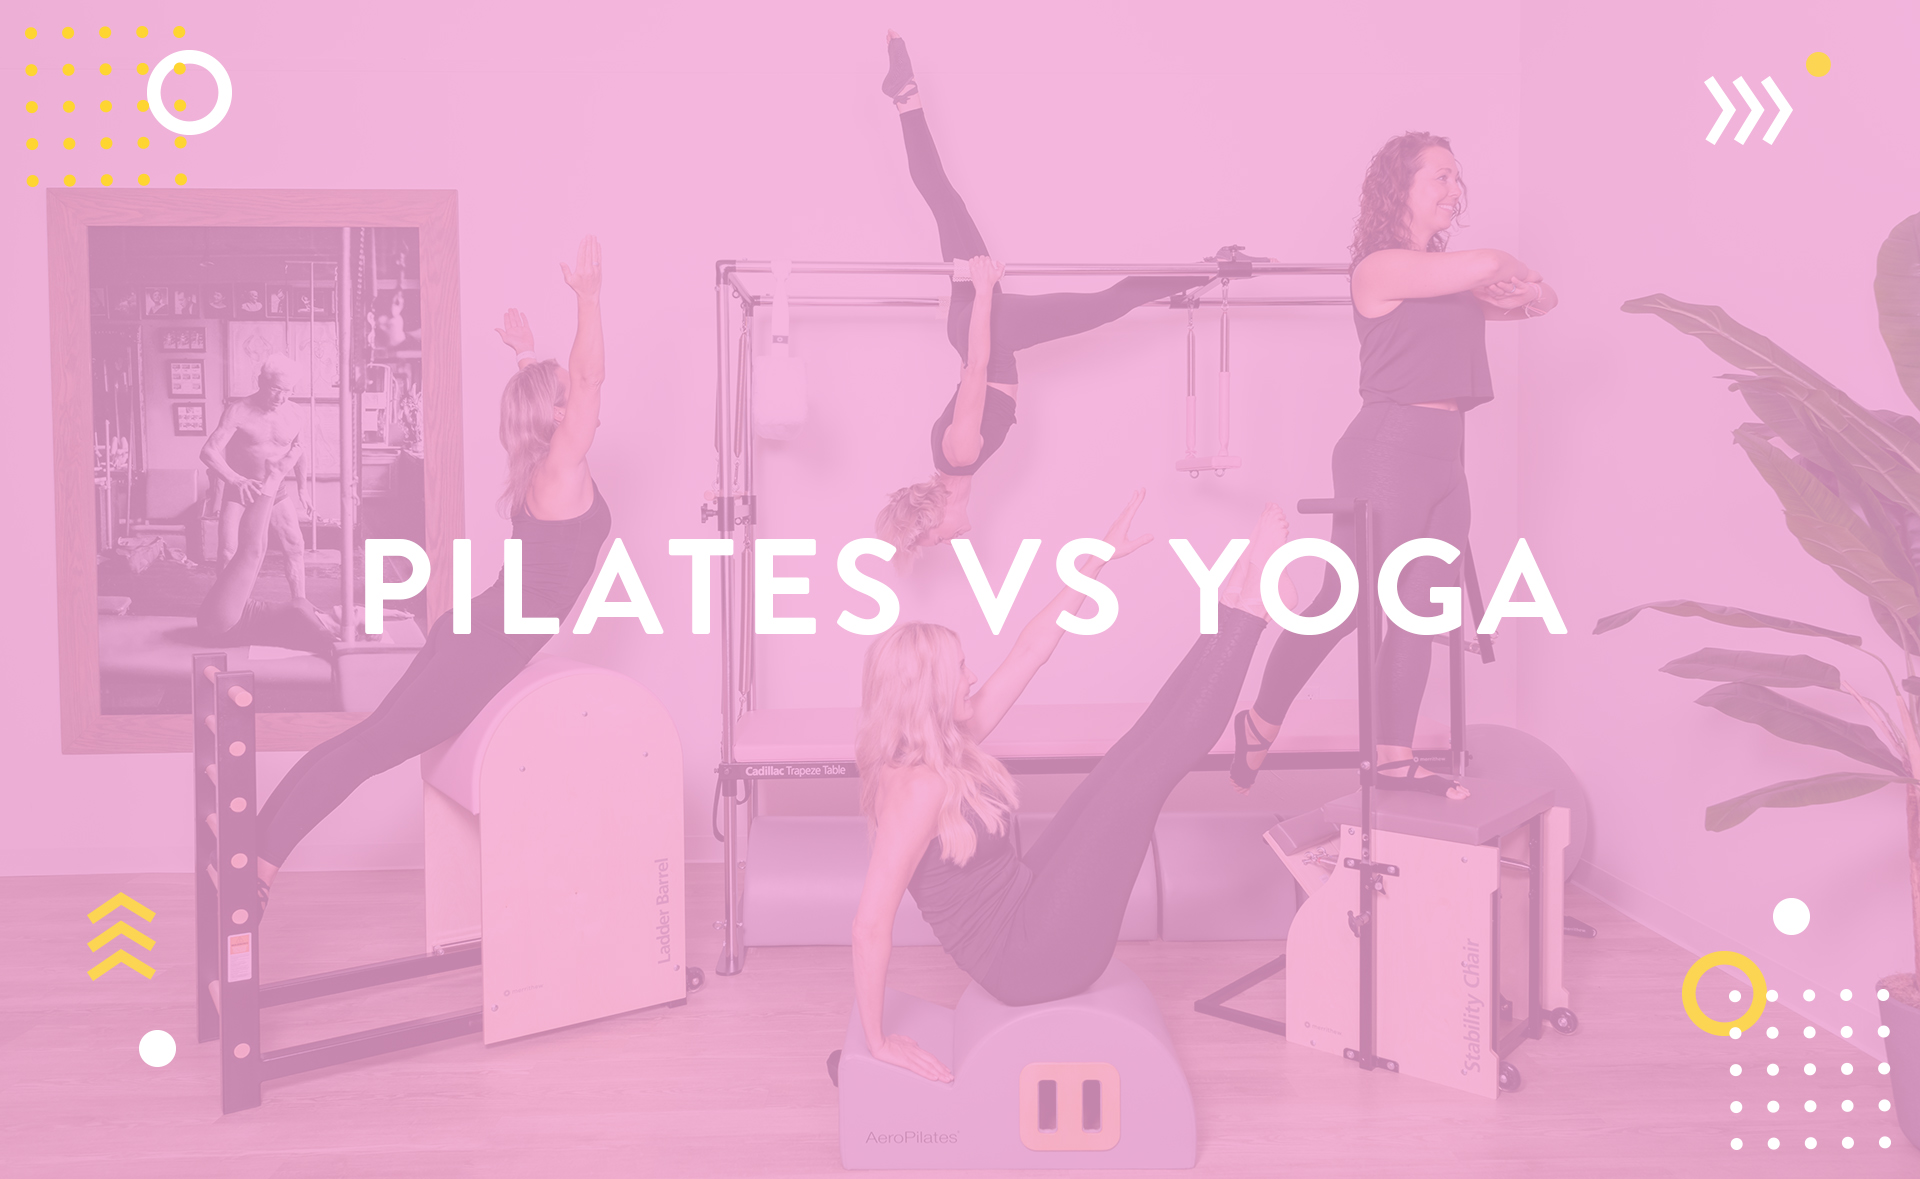 Pilates & Yoga: What's the Difference?